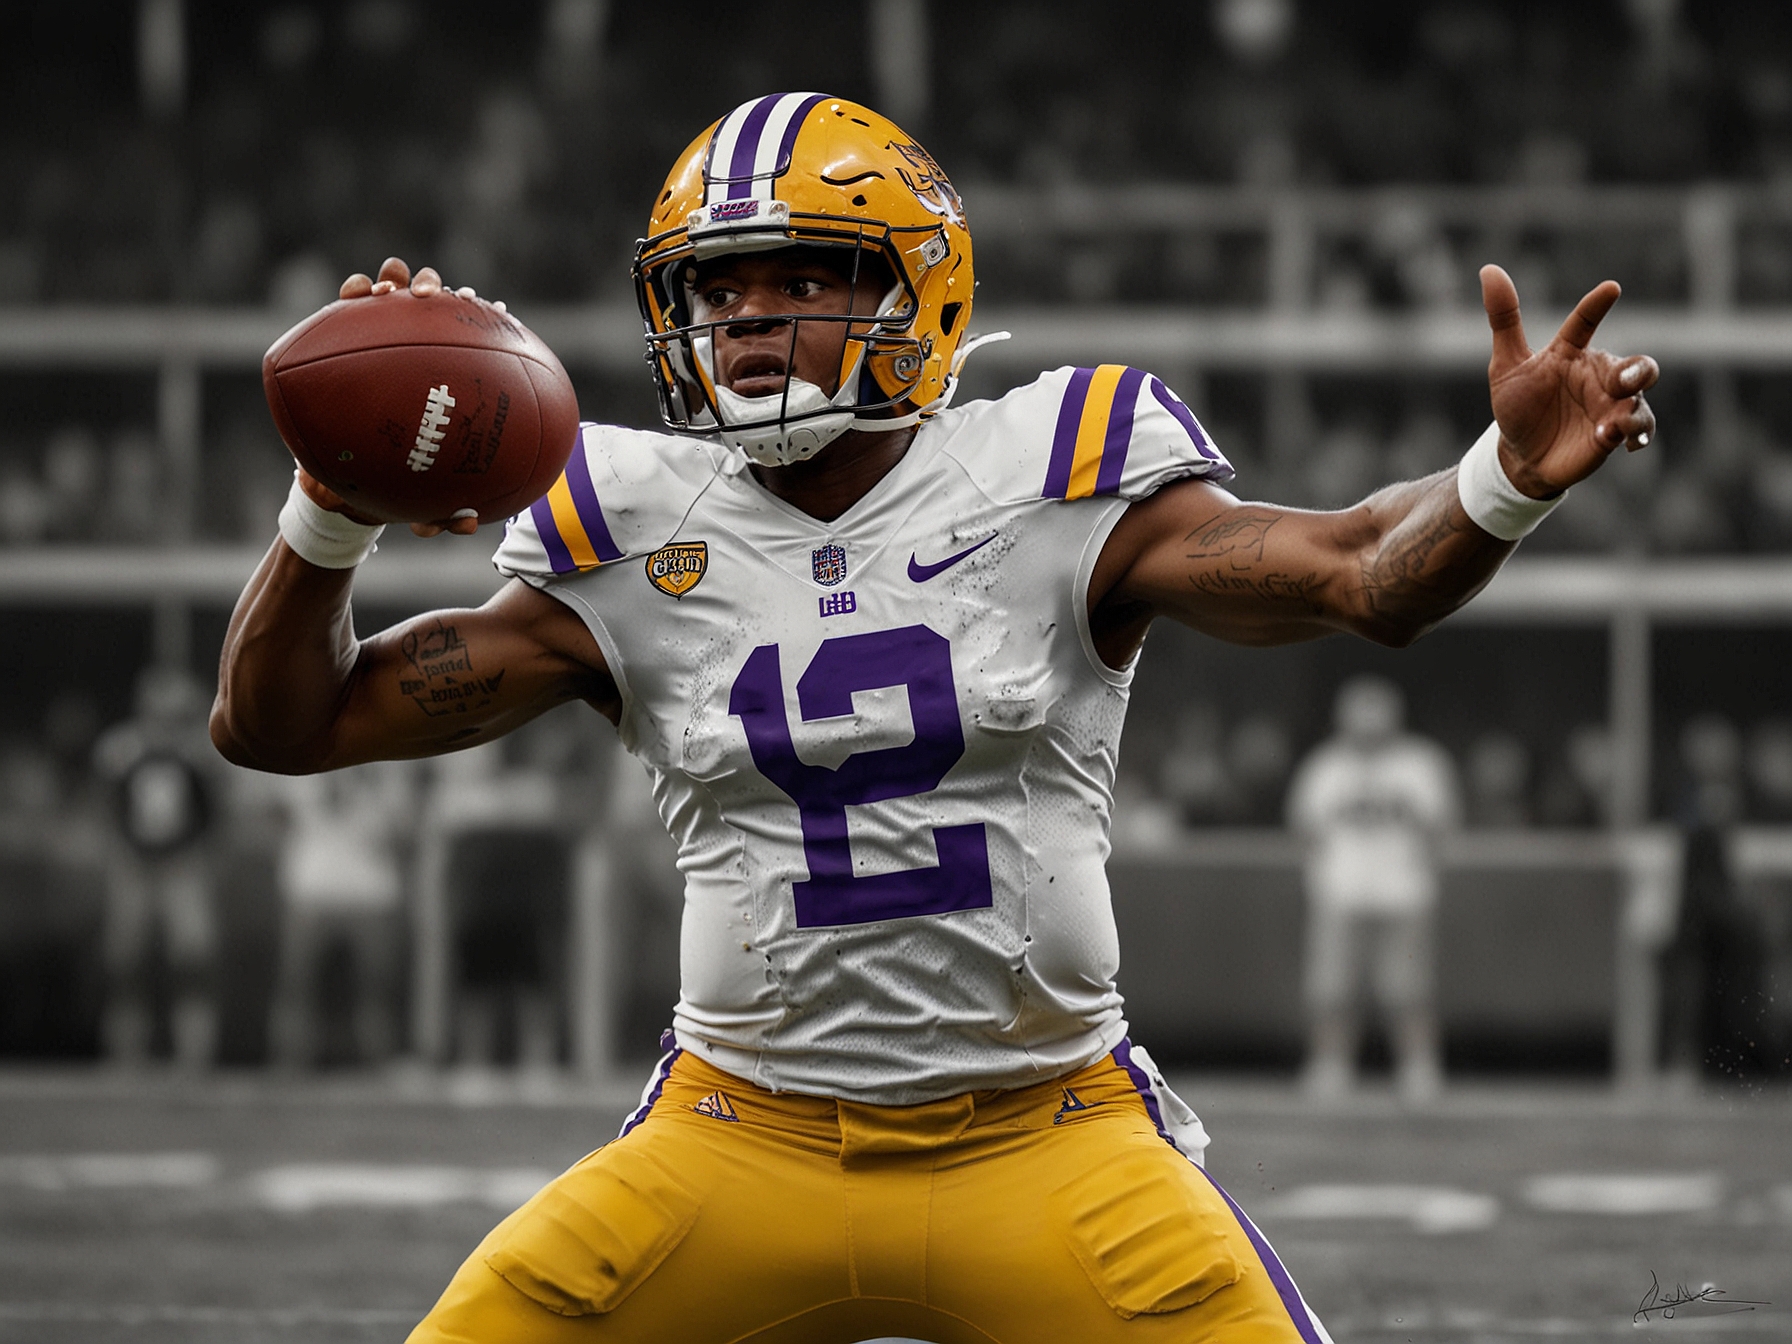 Jayden Daniels, in LSU uniform, showcasing his dual-threat capability by eluding a defender and preparing to throw a pass downfield, embodying his potential to elevate an NFL offense.